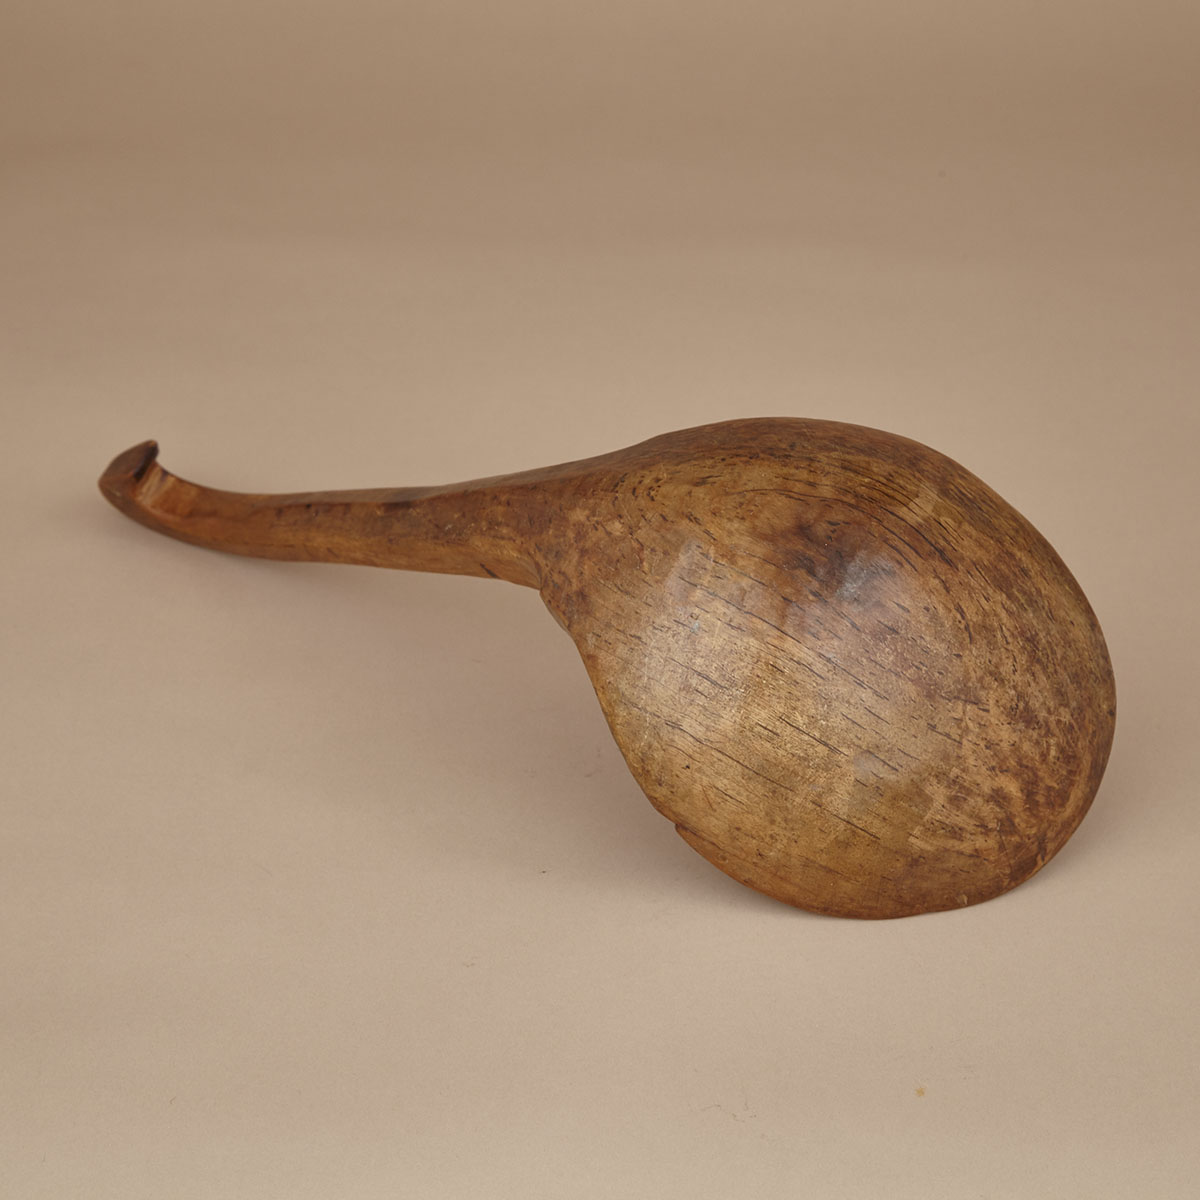 GREAT LAKES LADLE